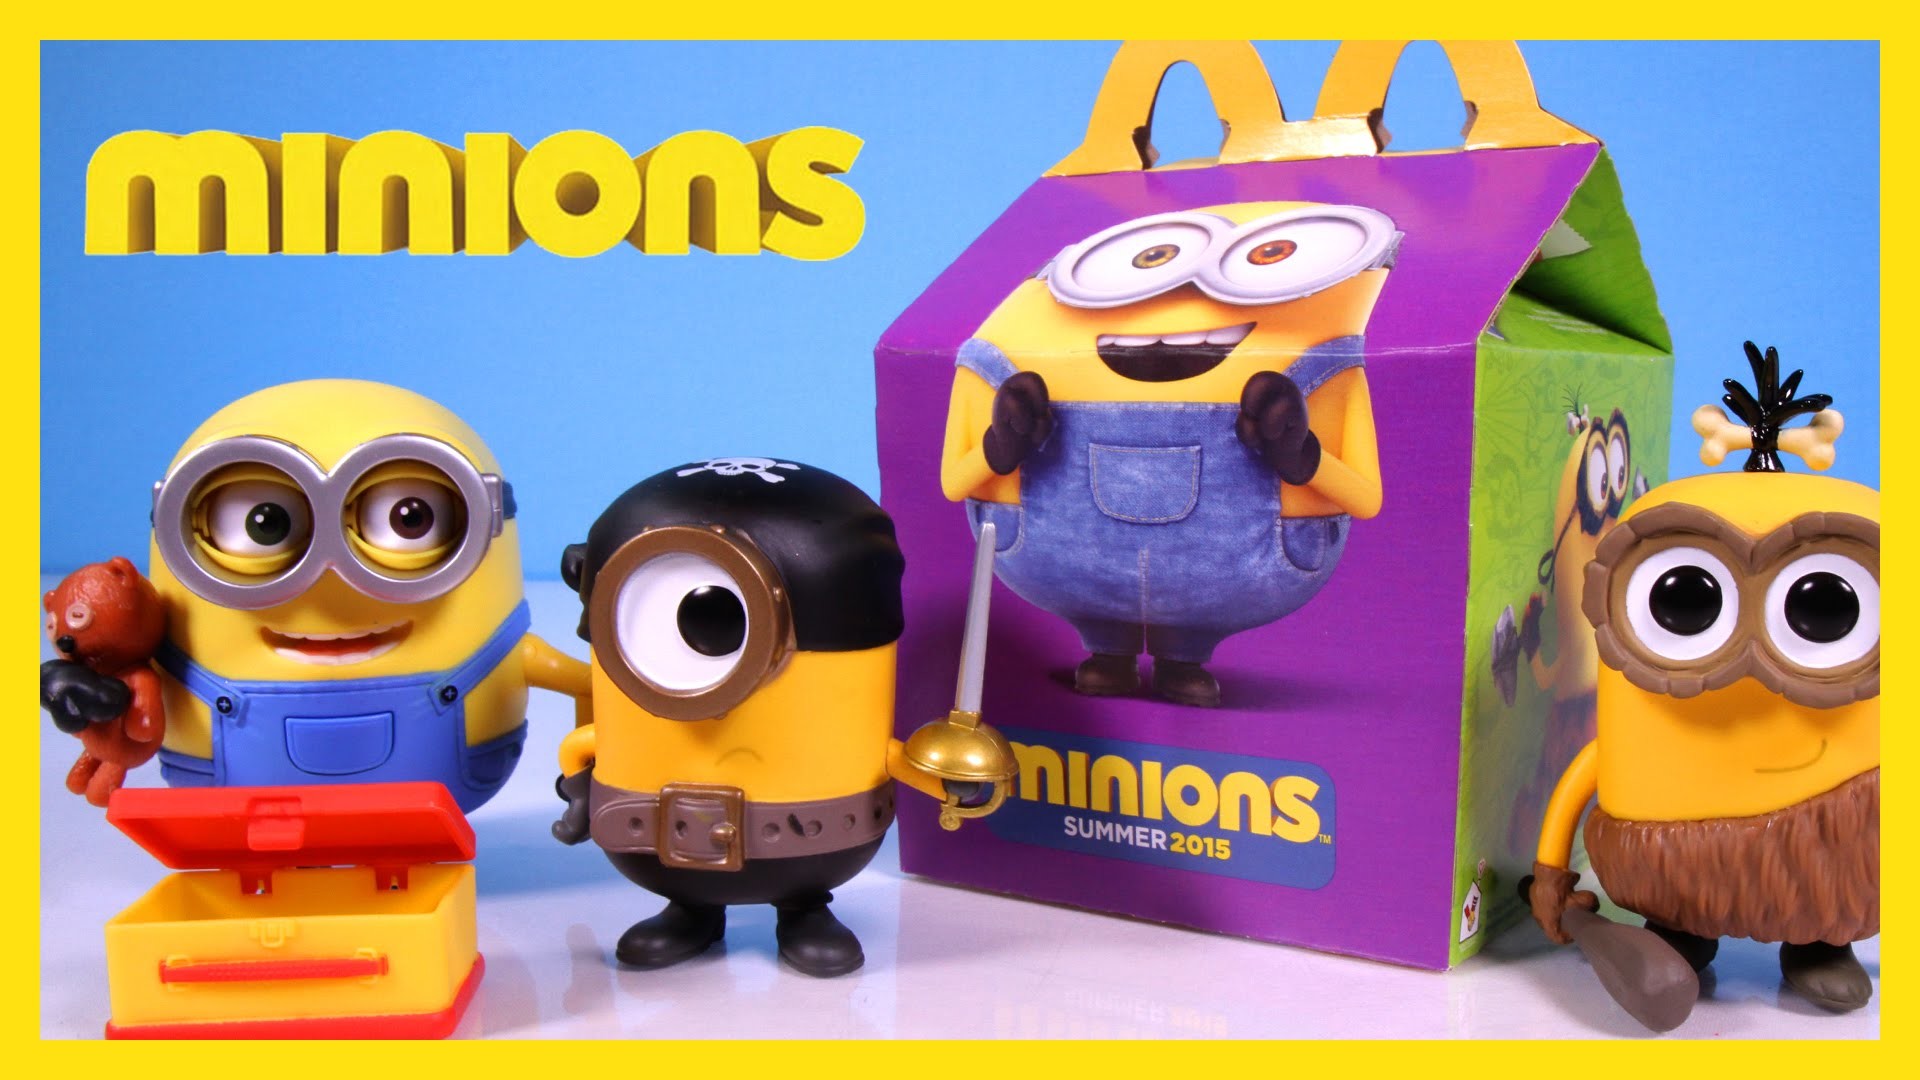 1920x1080 Minions Happy Meal Surprise Toys from McDonald's, Deluxe Figure Bob and  Pirate & Caveman Funko Pops